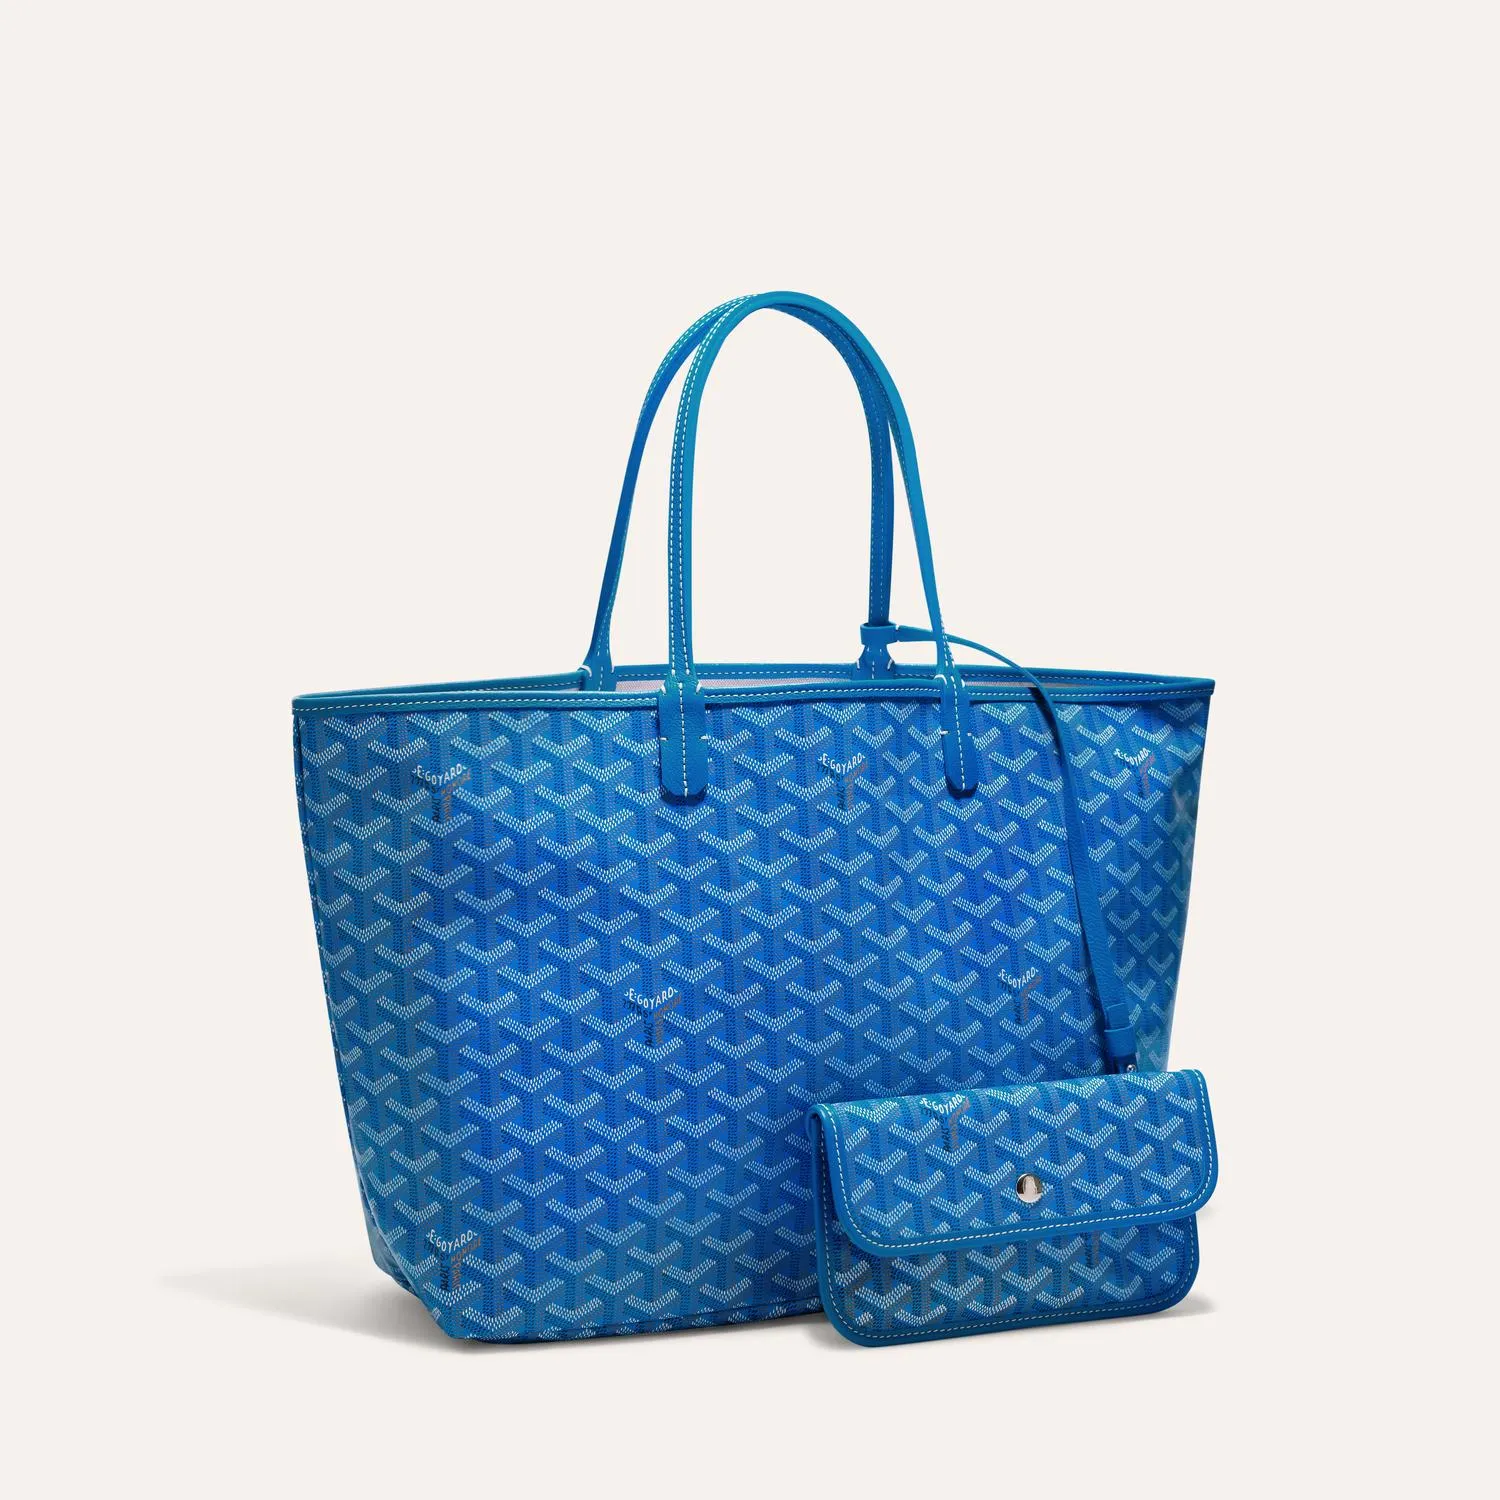 Image 1 of ゴヤール セントルイスPMバッグ SAINT LOUISE TOTE PM SKYB